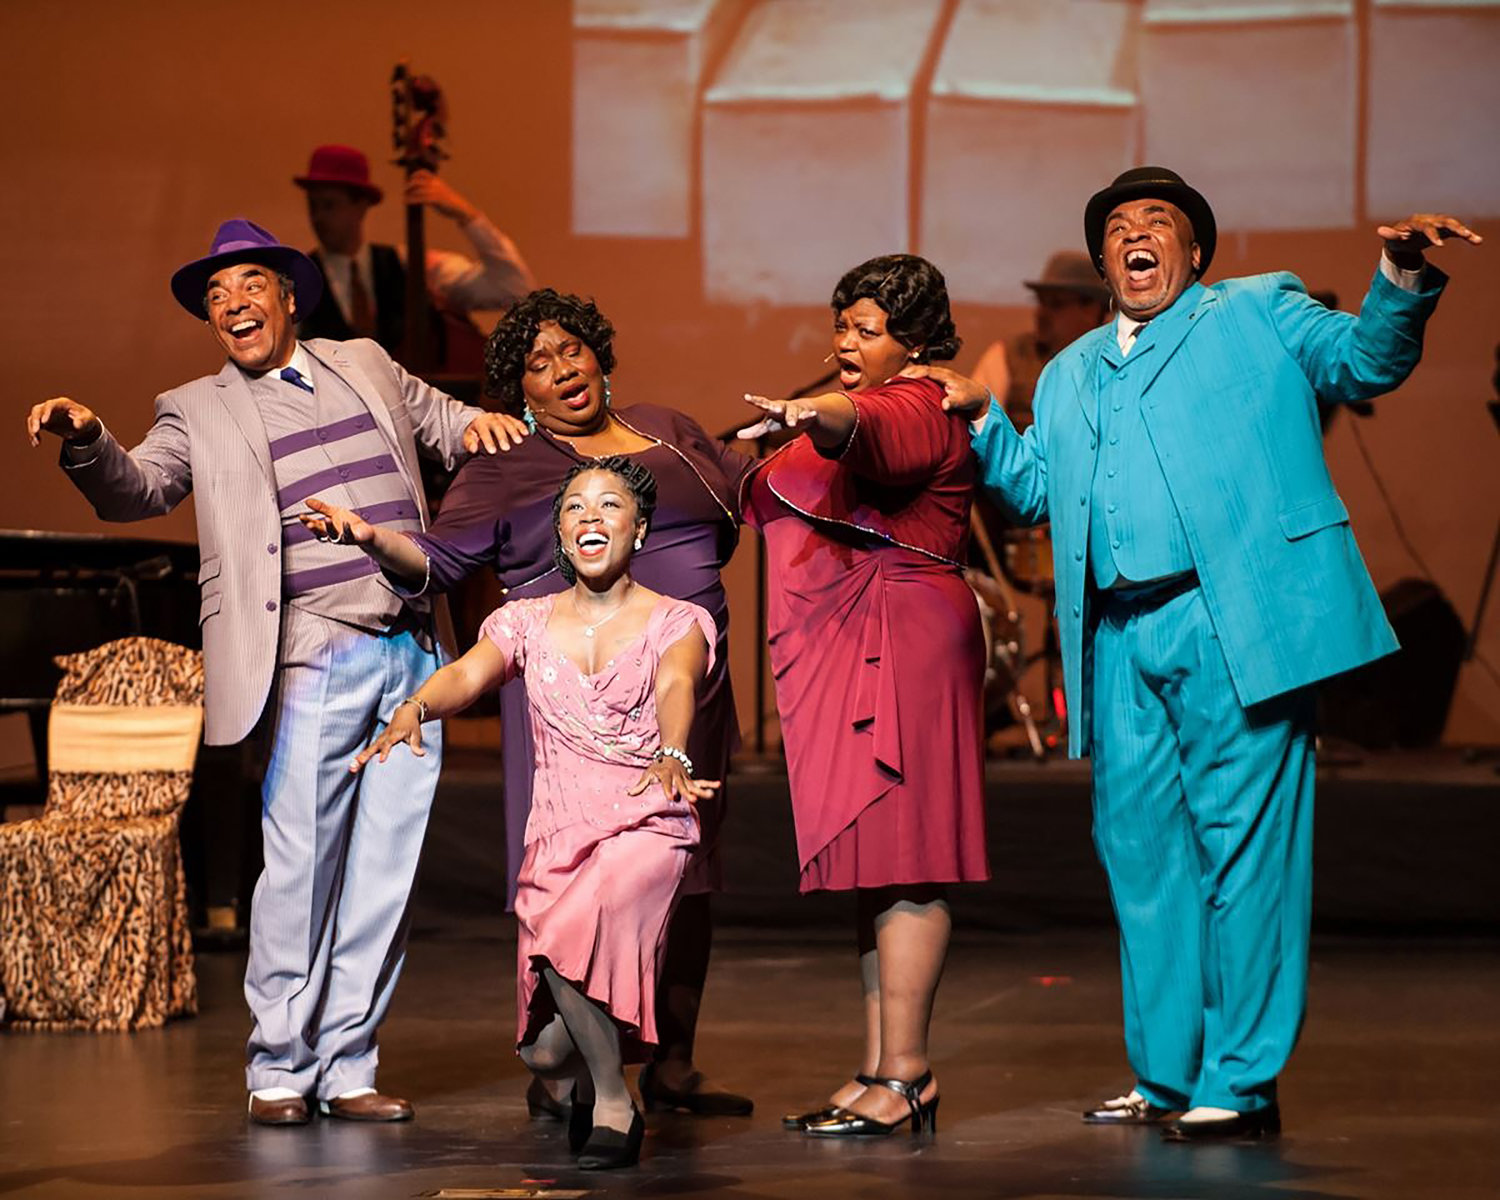 Fans of the musical 'Ain't Misbehavin'' can catch a performance of it at the Lehman Center for the Performing Arts on Jan. 18.